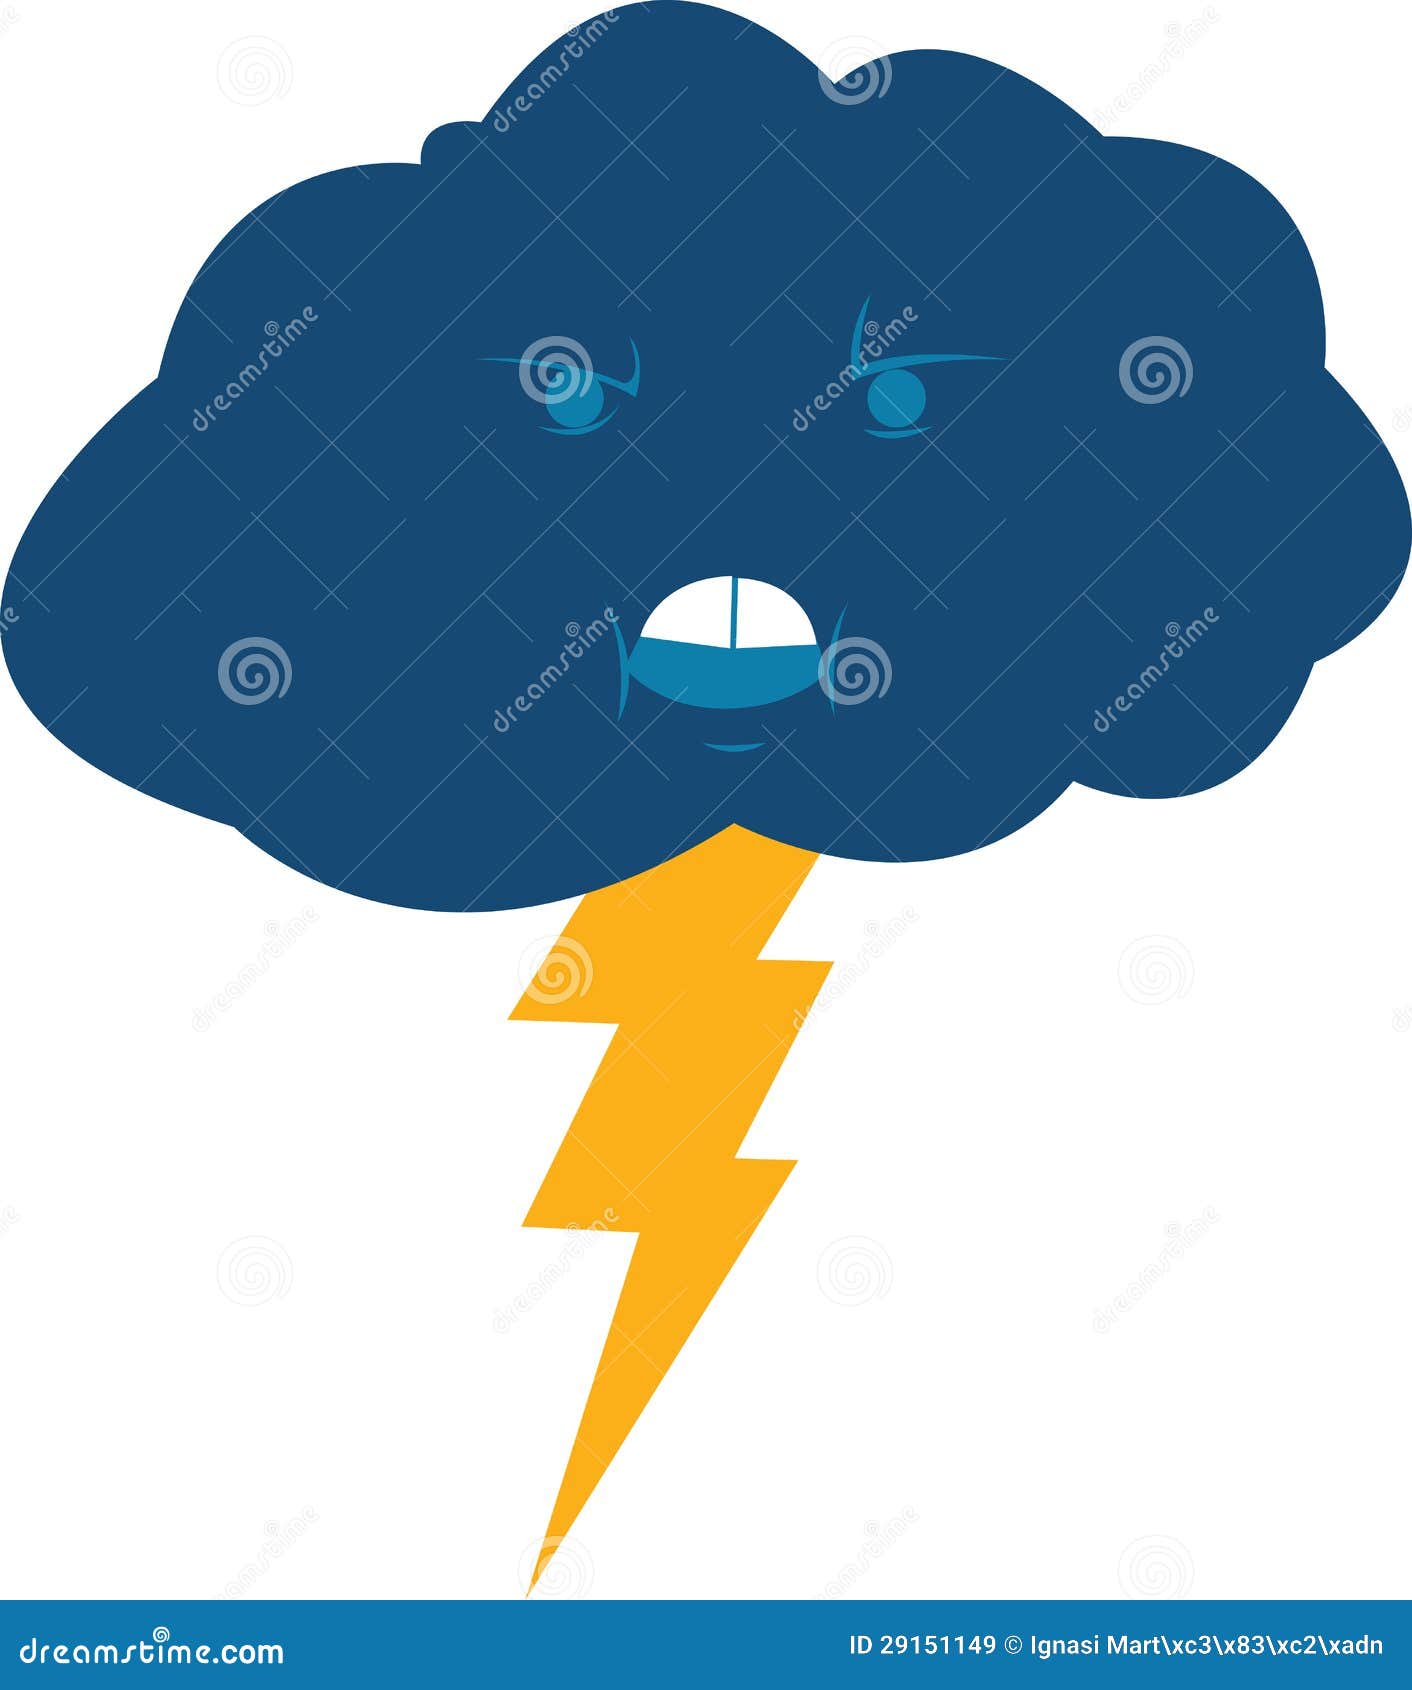 Angry cloud stock vector. Illustration of mouth, face - 29151149